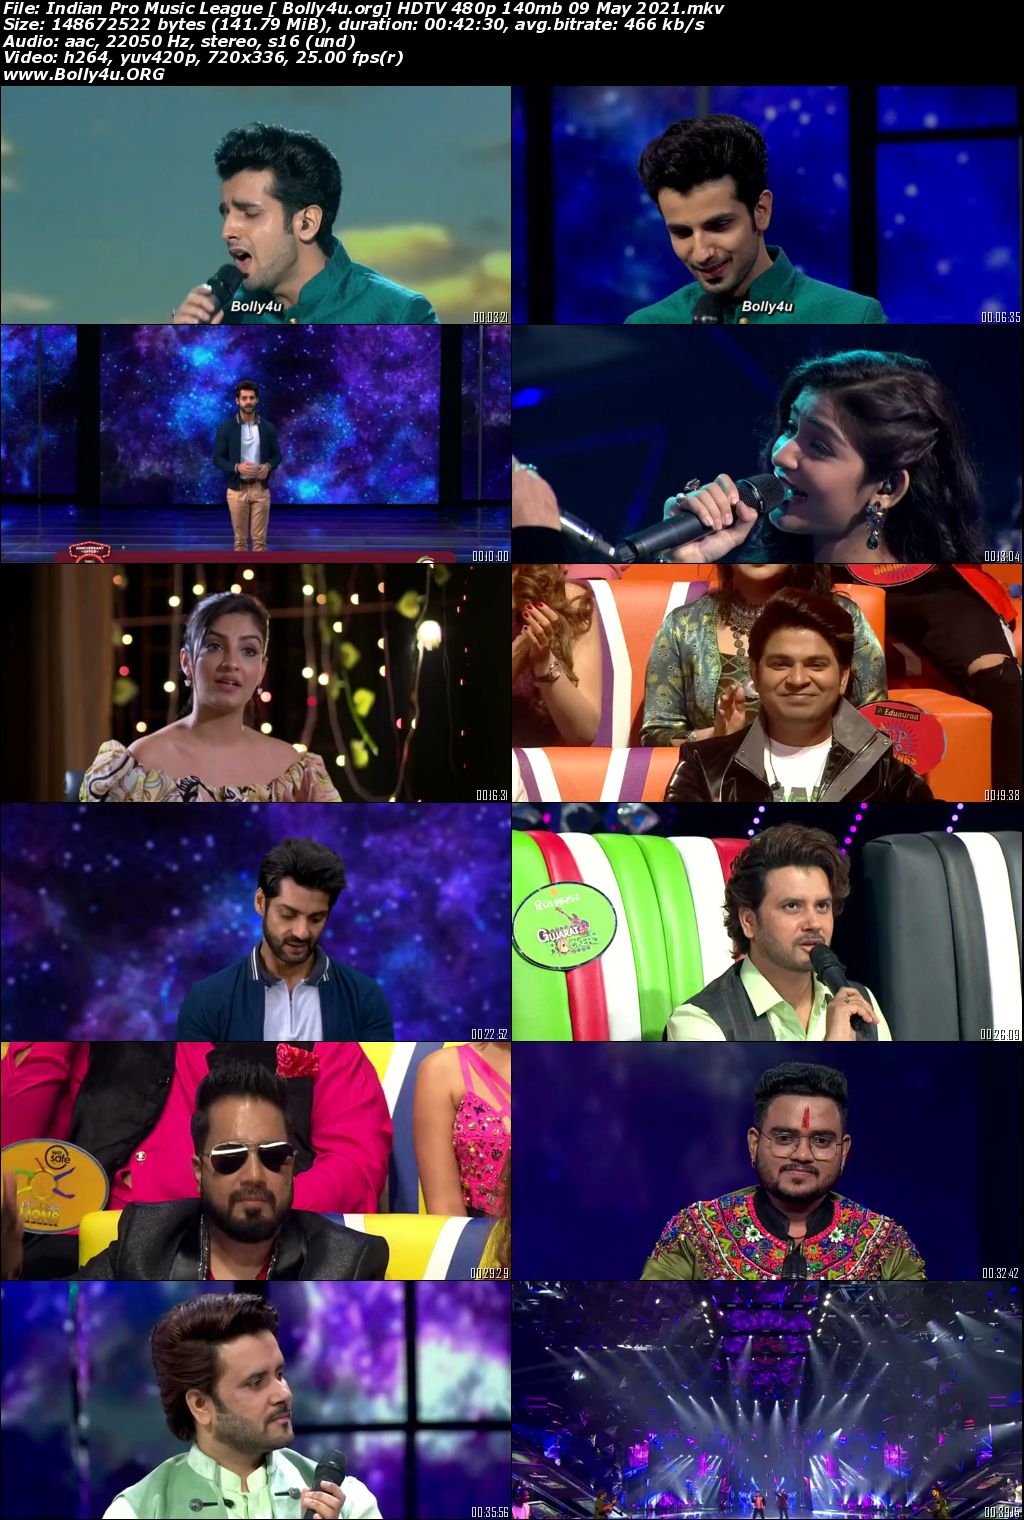 Indian Pro Music League HDTV 480p 140mb 09 May 2021 Download